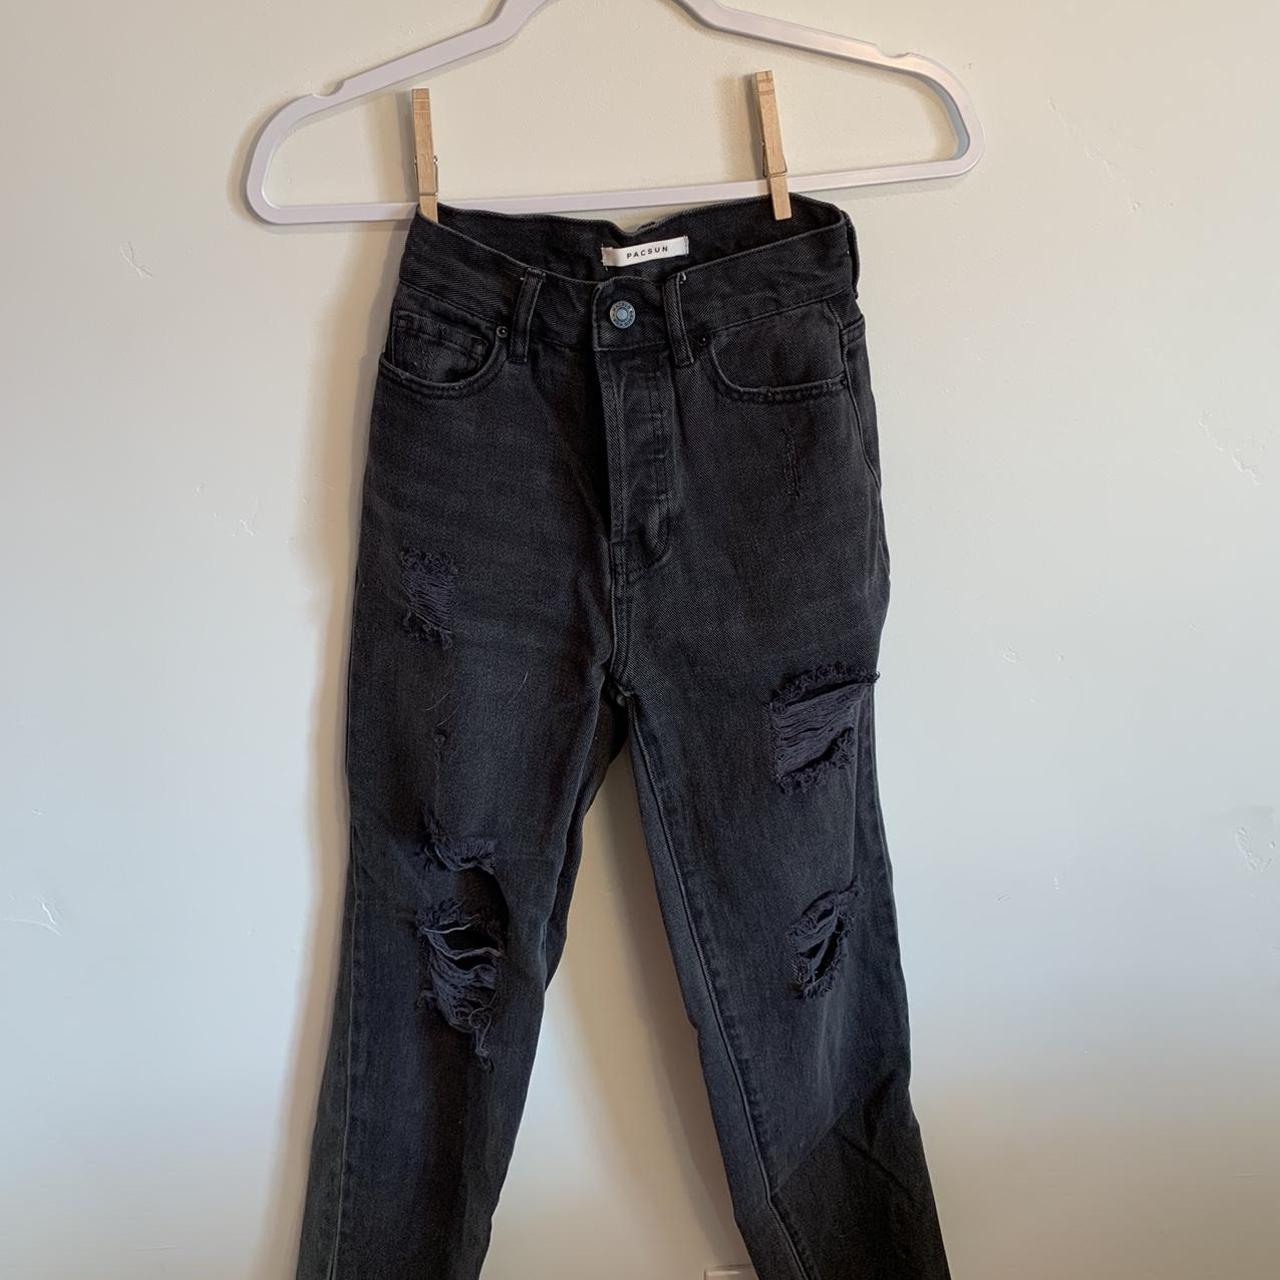 Pacsun high waisted straight leg ripped jeans! I - Depop